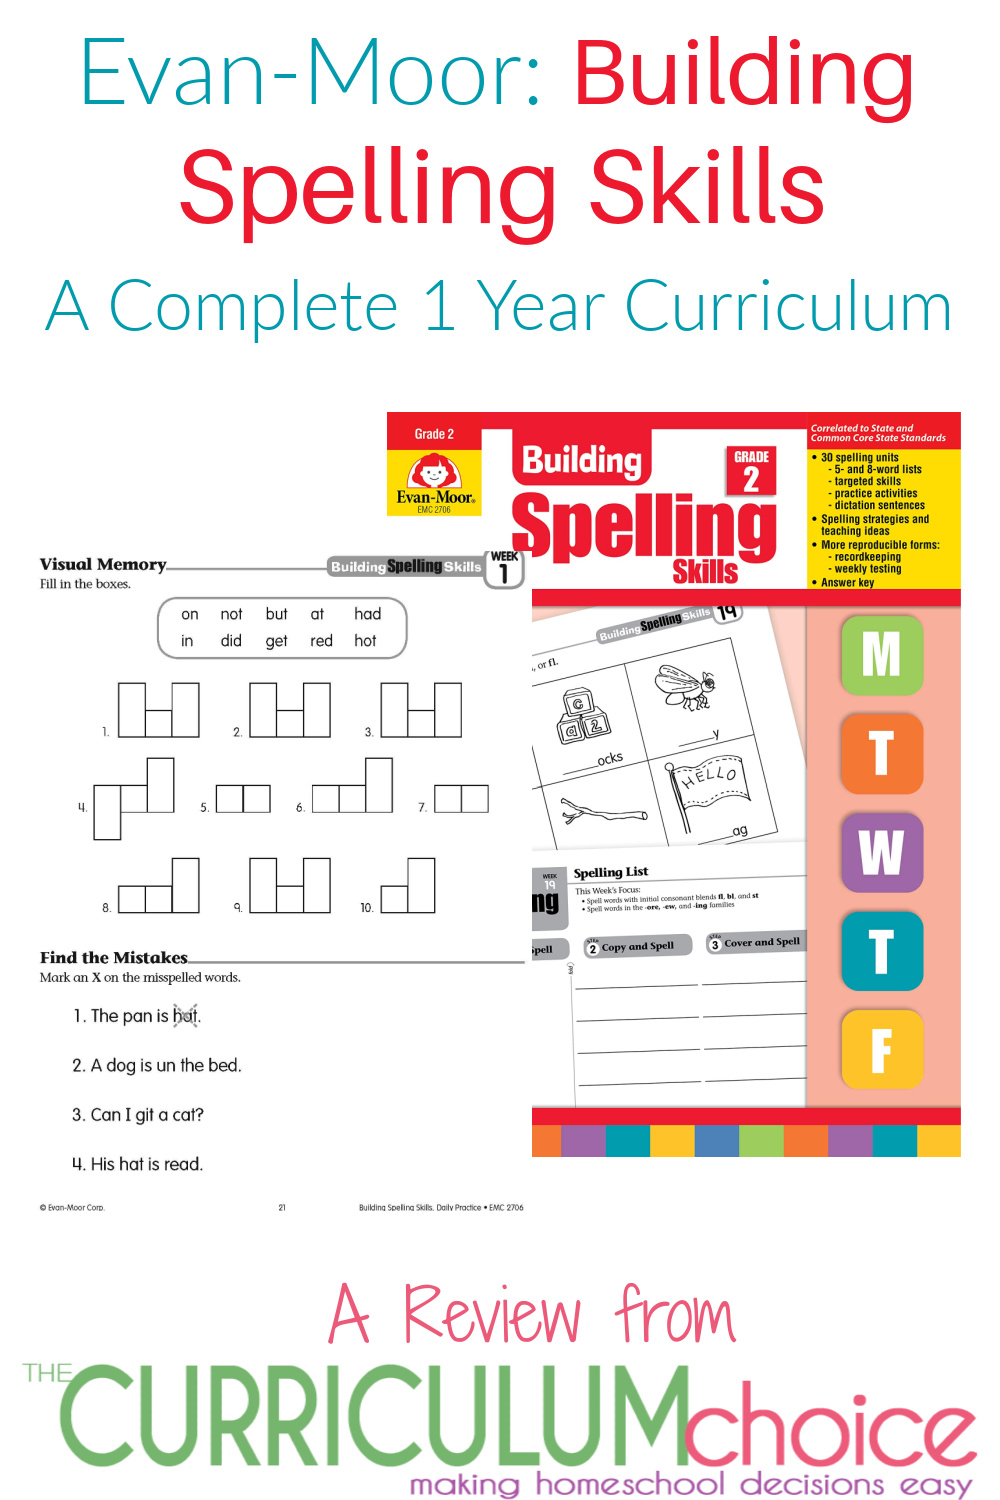 Evan-Moor Building Spelling Skills is a complete 1 year spelling curriculum for grades 1 through 6. A Review from the Curriculum Choice